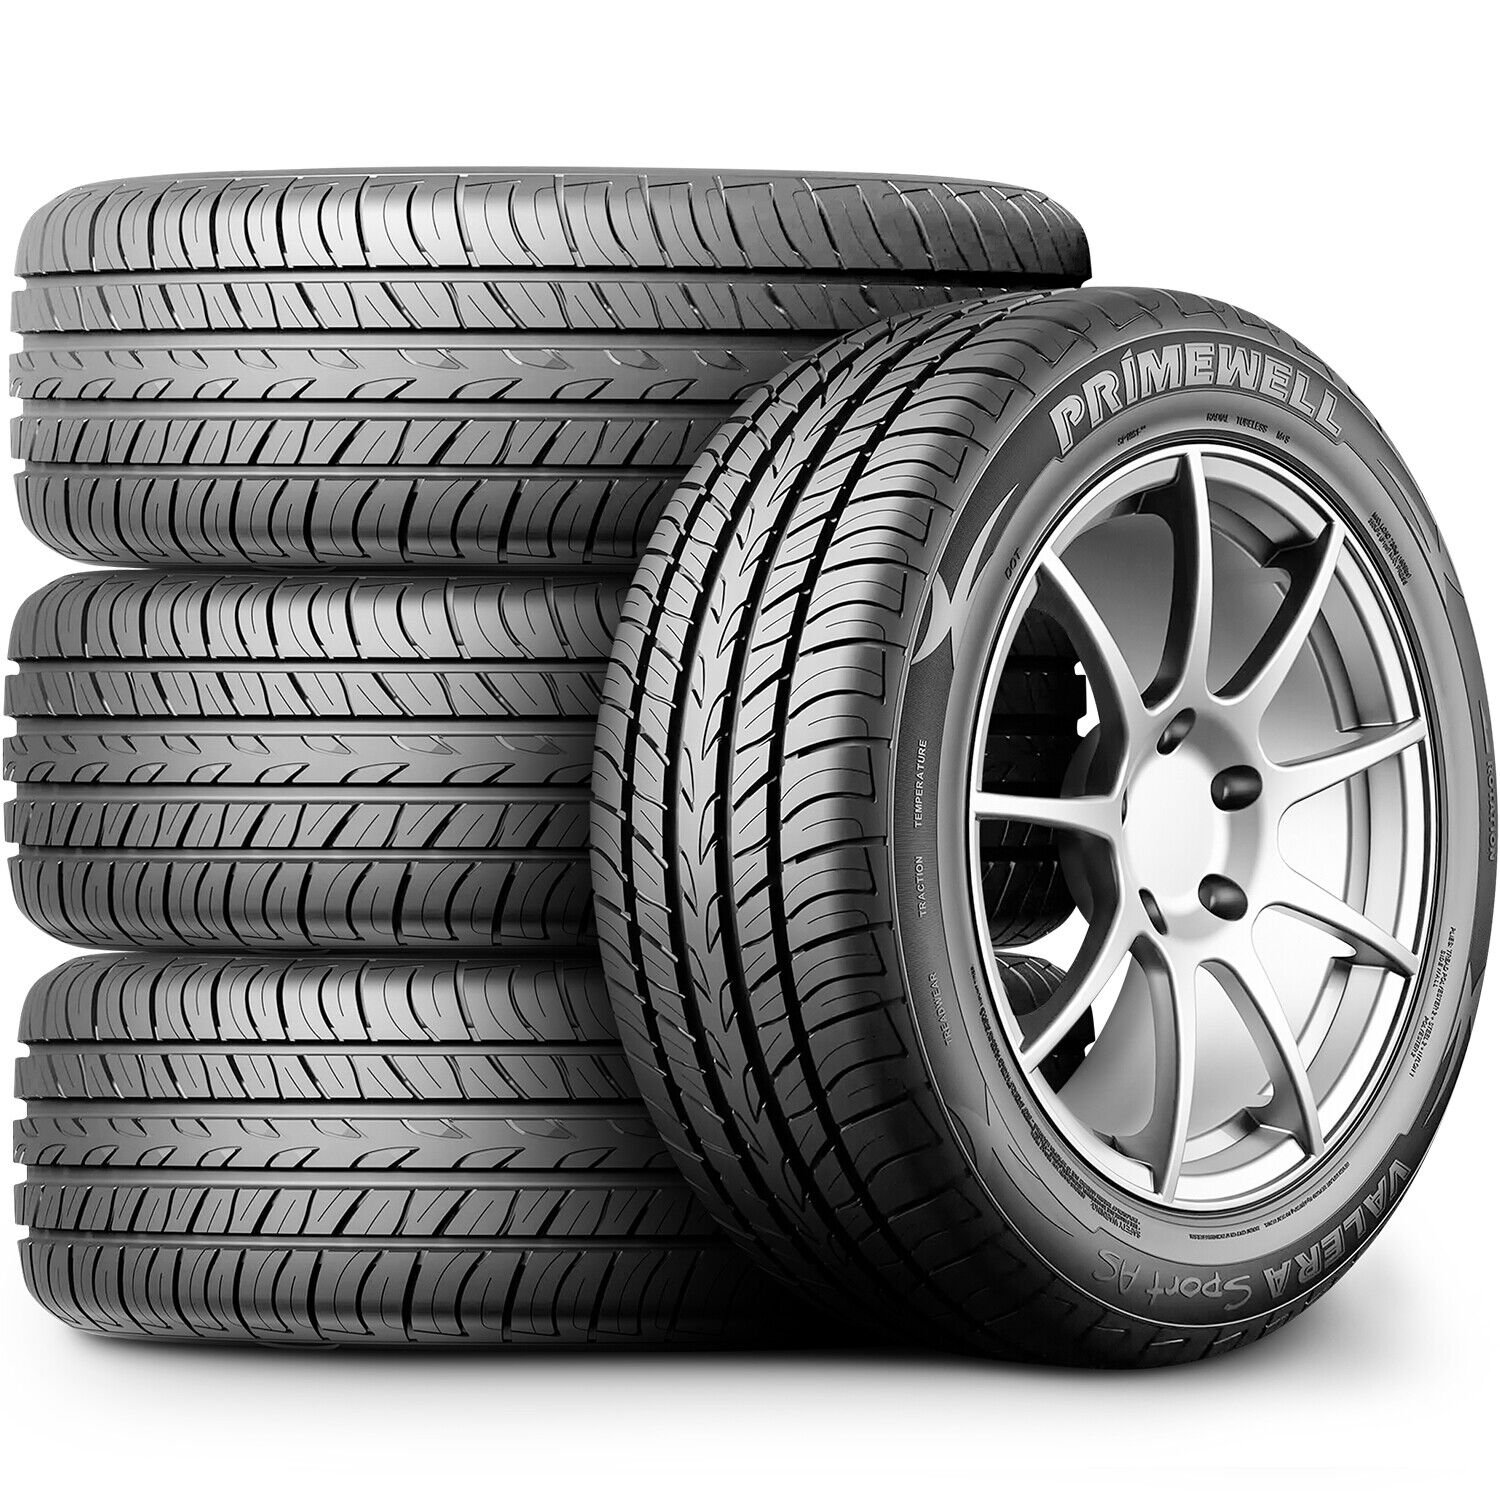 4 Tires Primewell Valera Sport AS 235/50ZR18 235/50R18 97W A/S High Performance